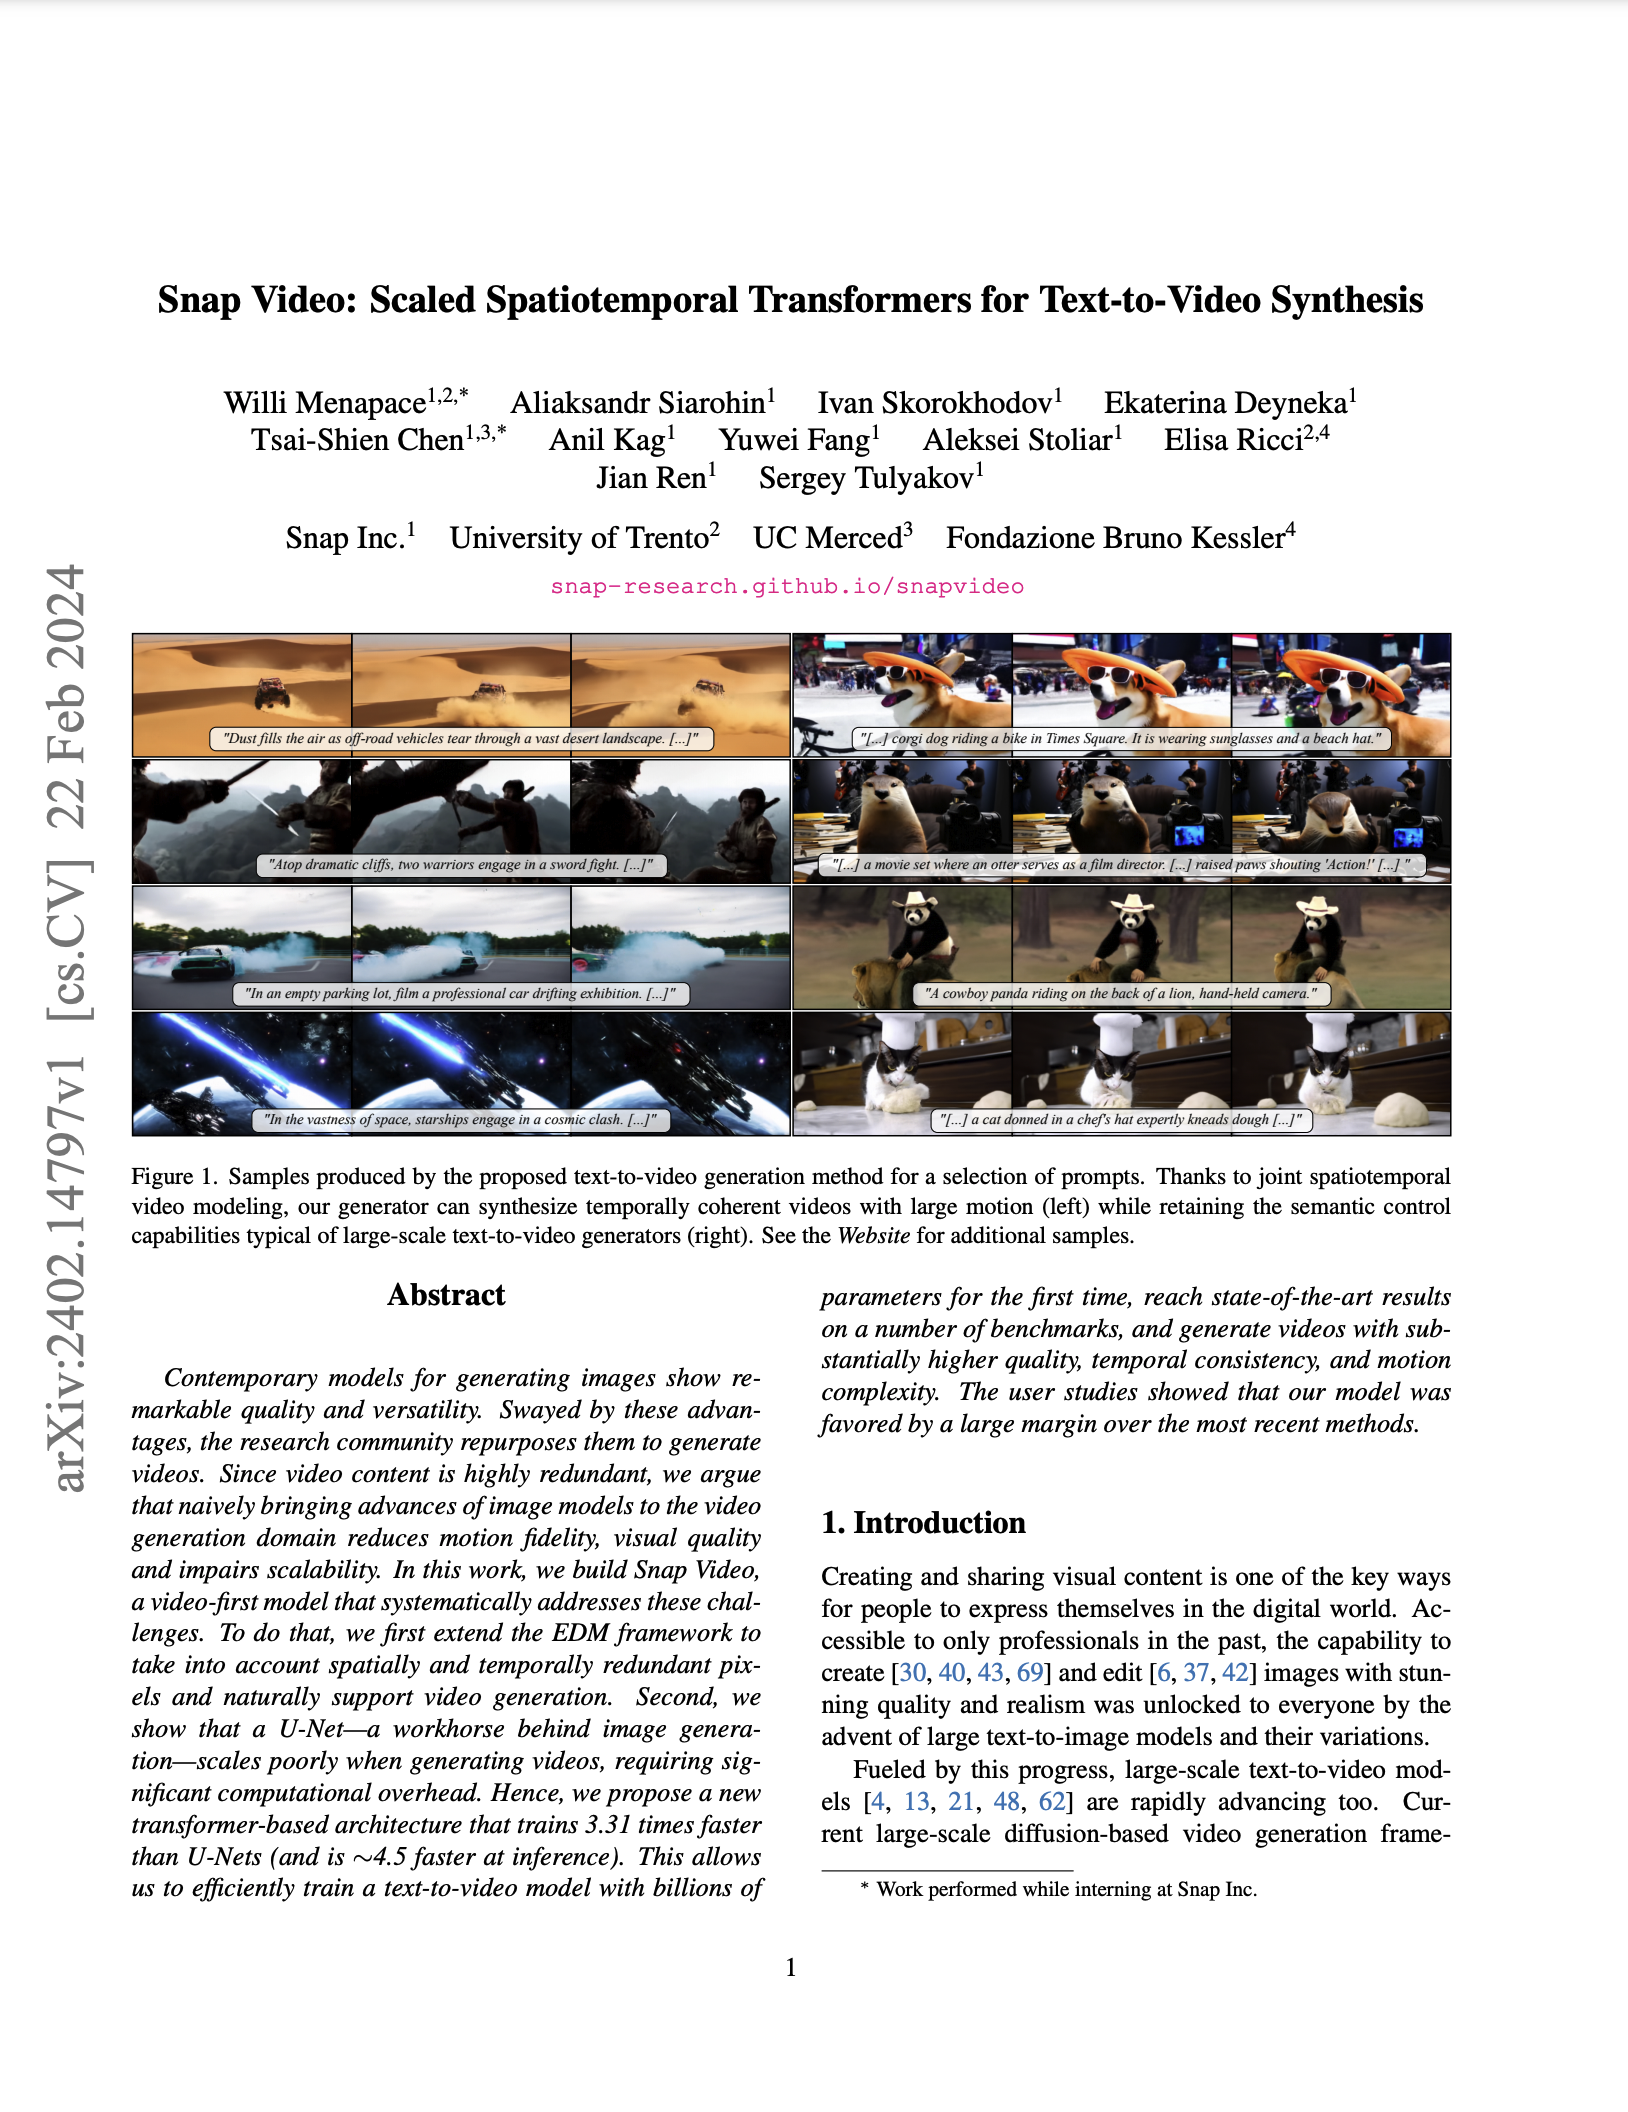 Snap Video: Scaled Spatiotemporal Transformers for Text-to-Video Synthesis